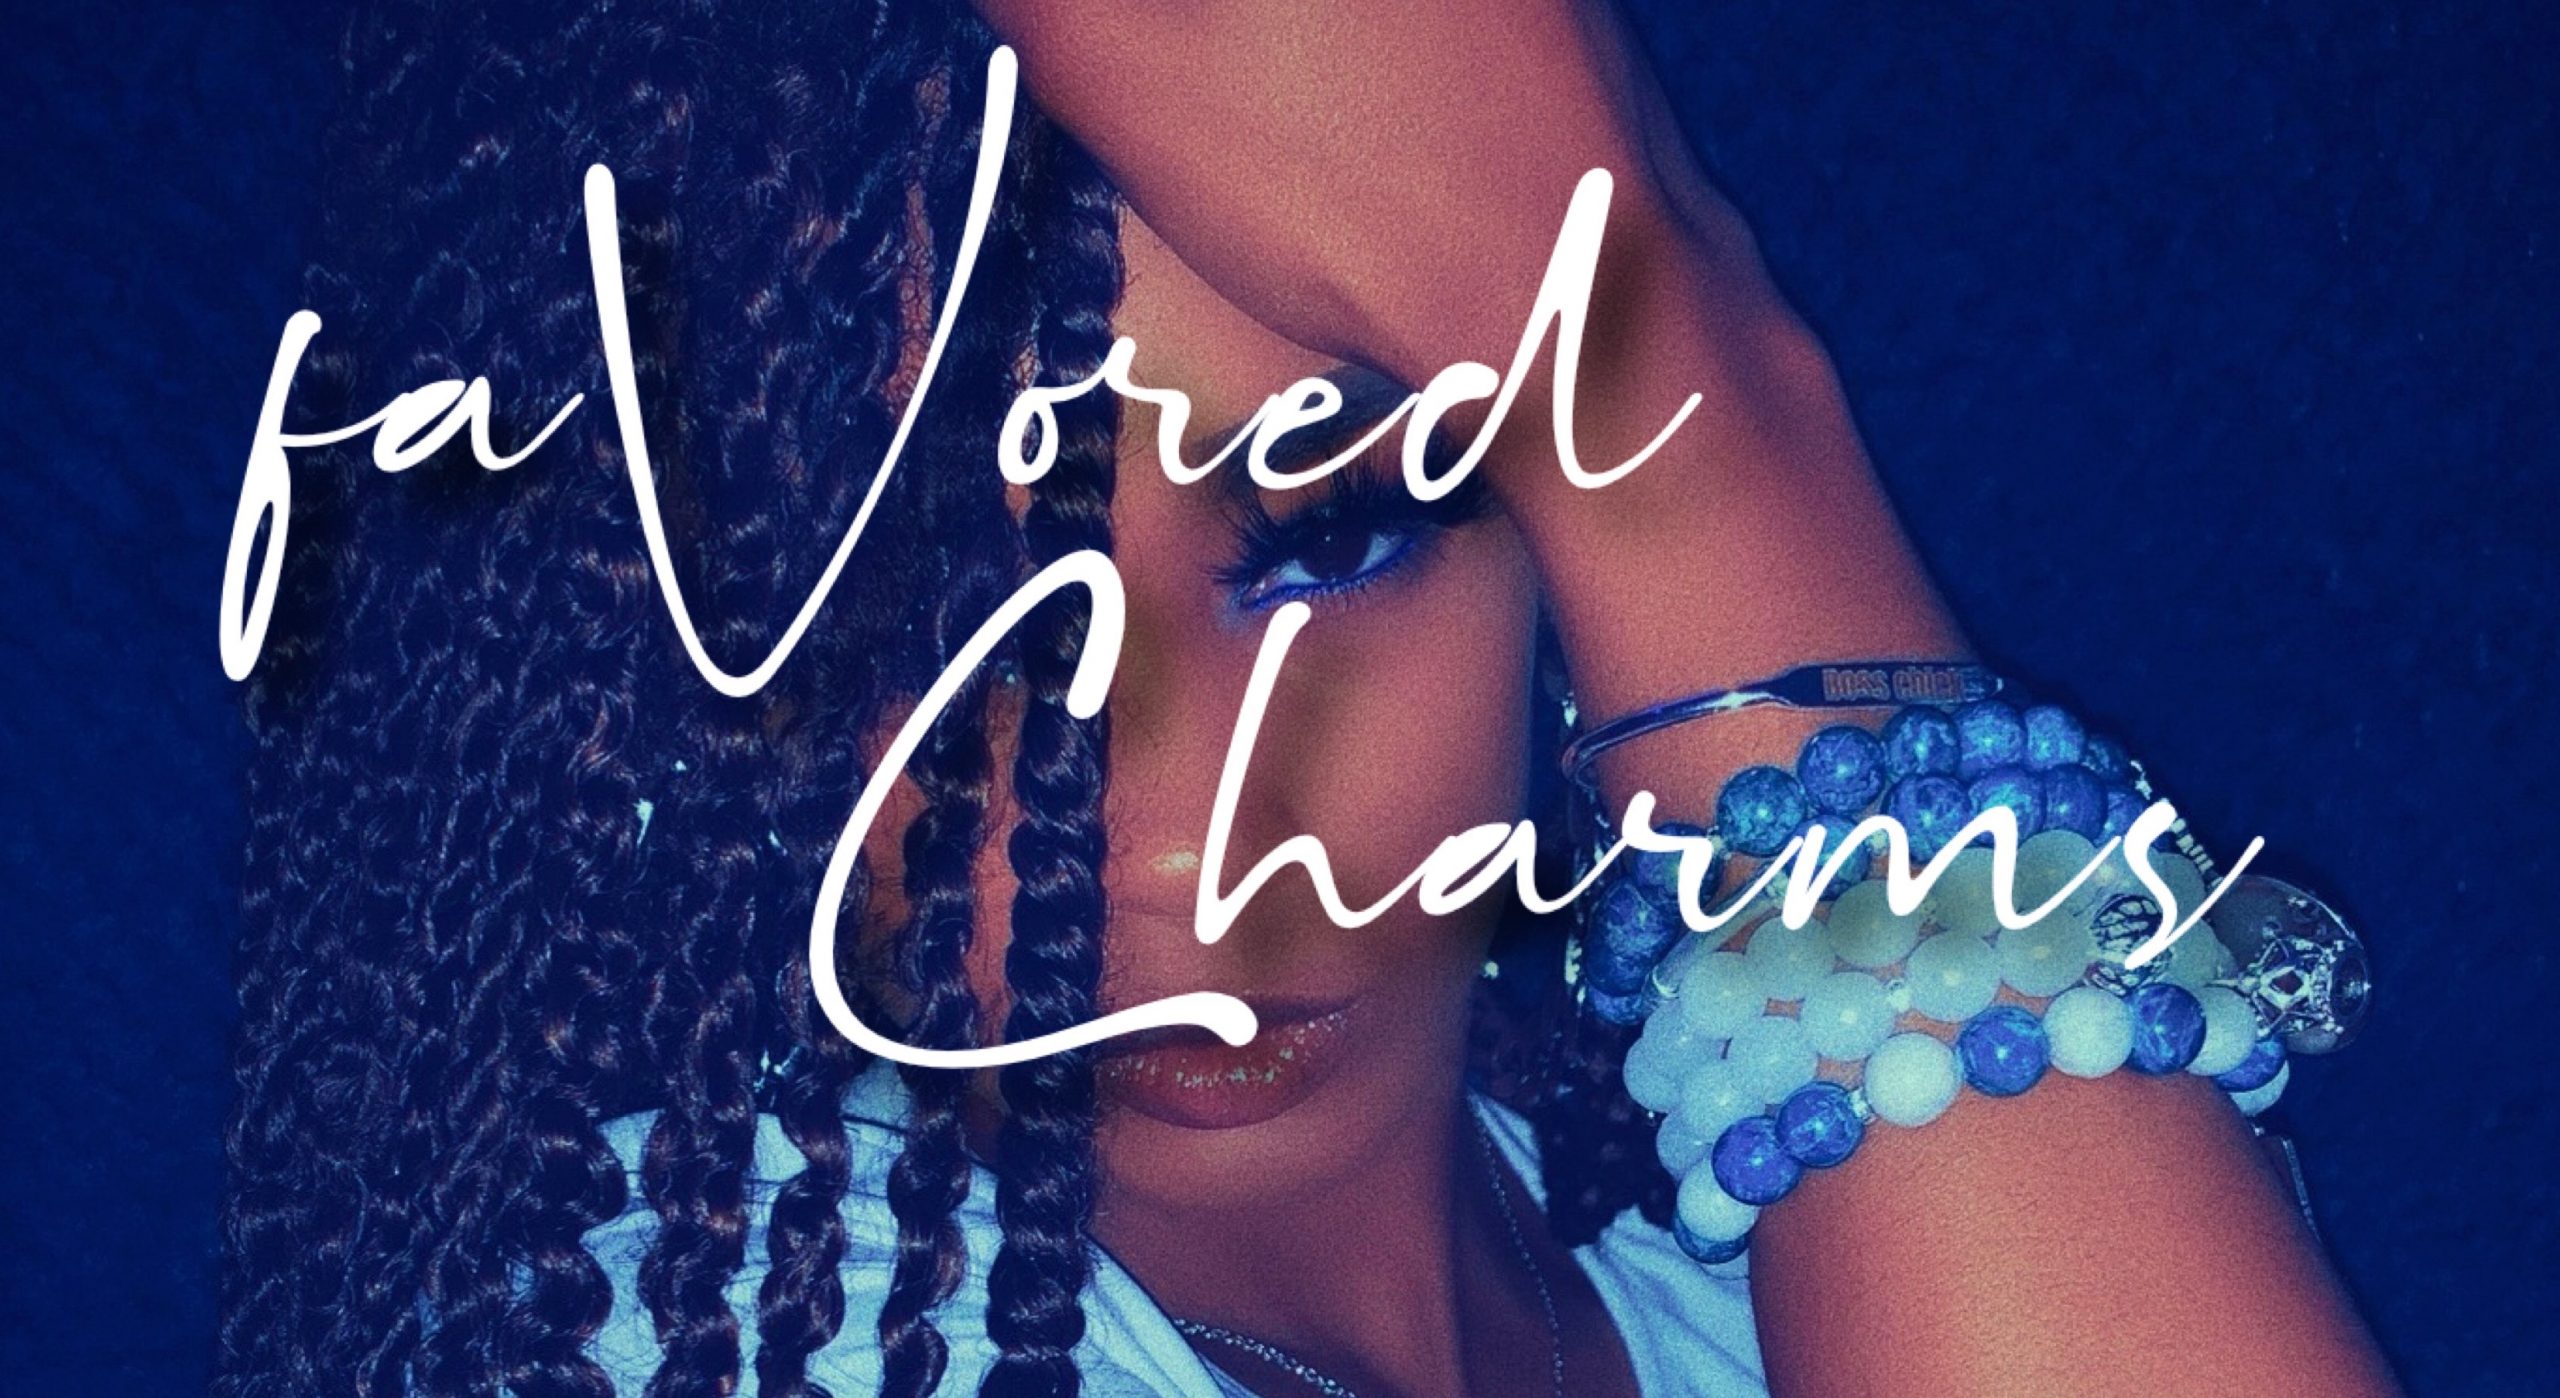 Favored Charms